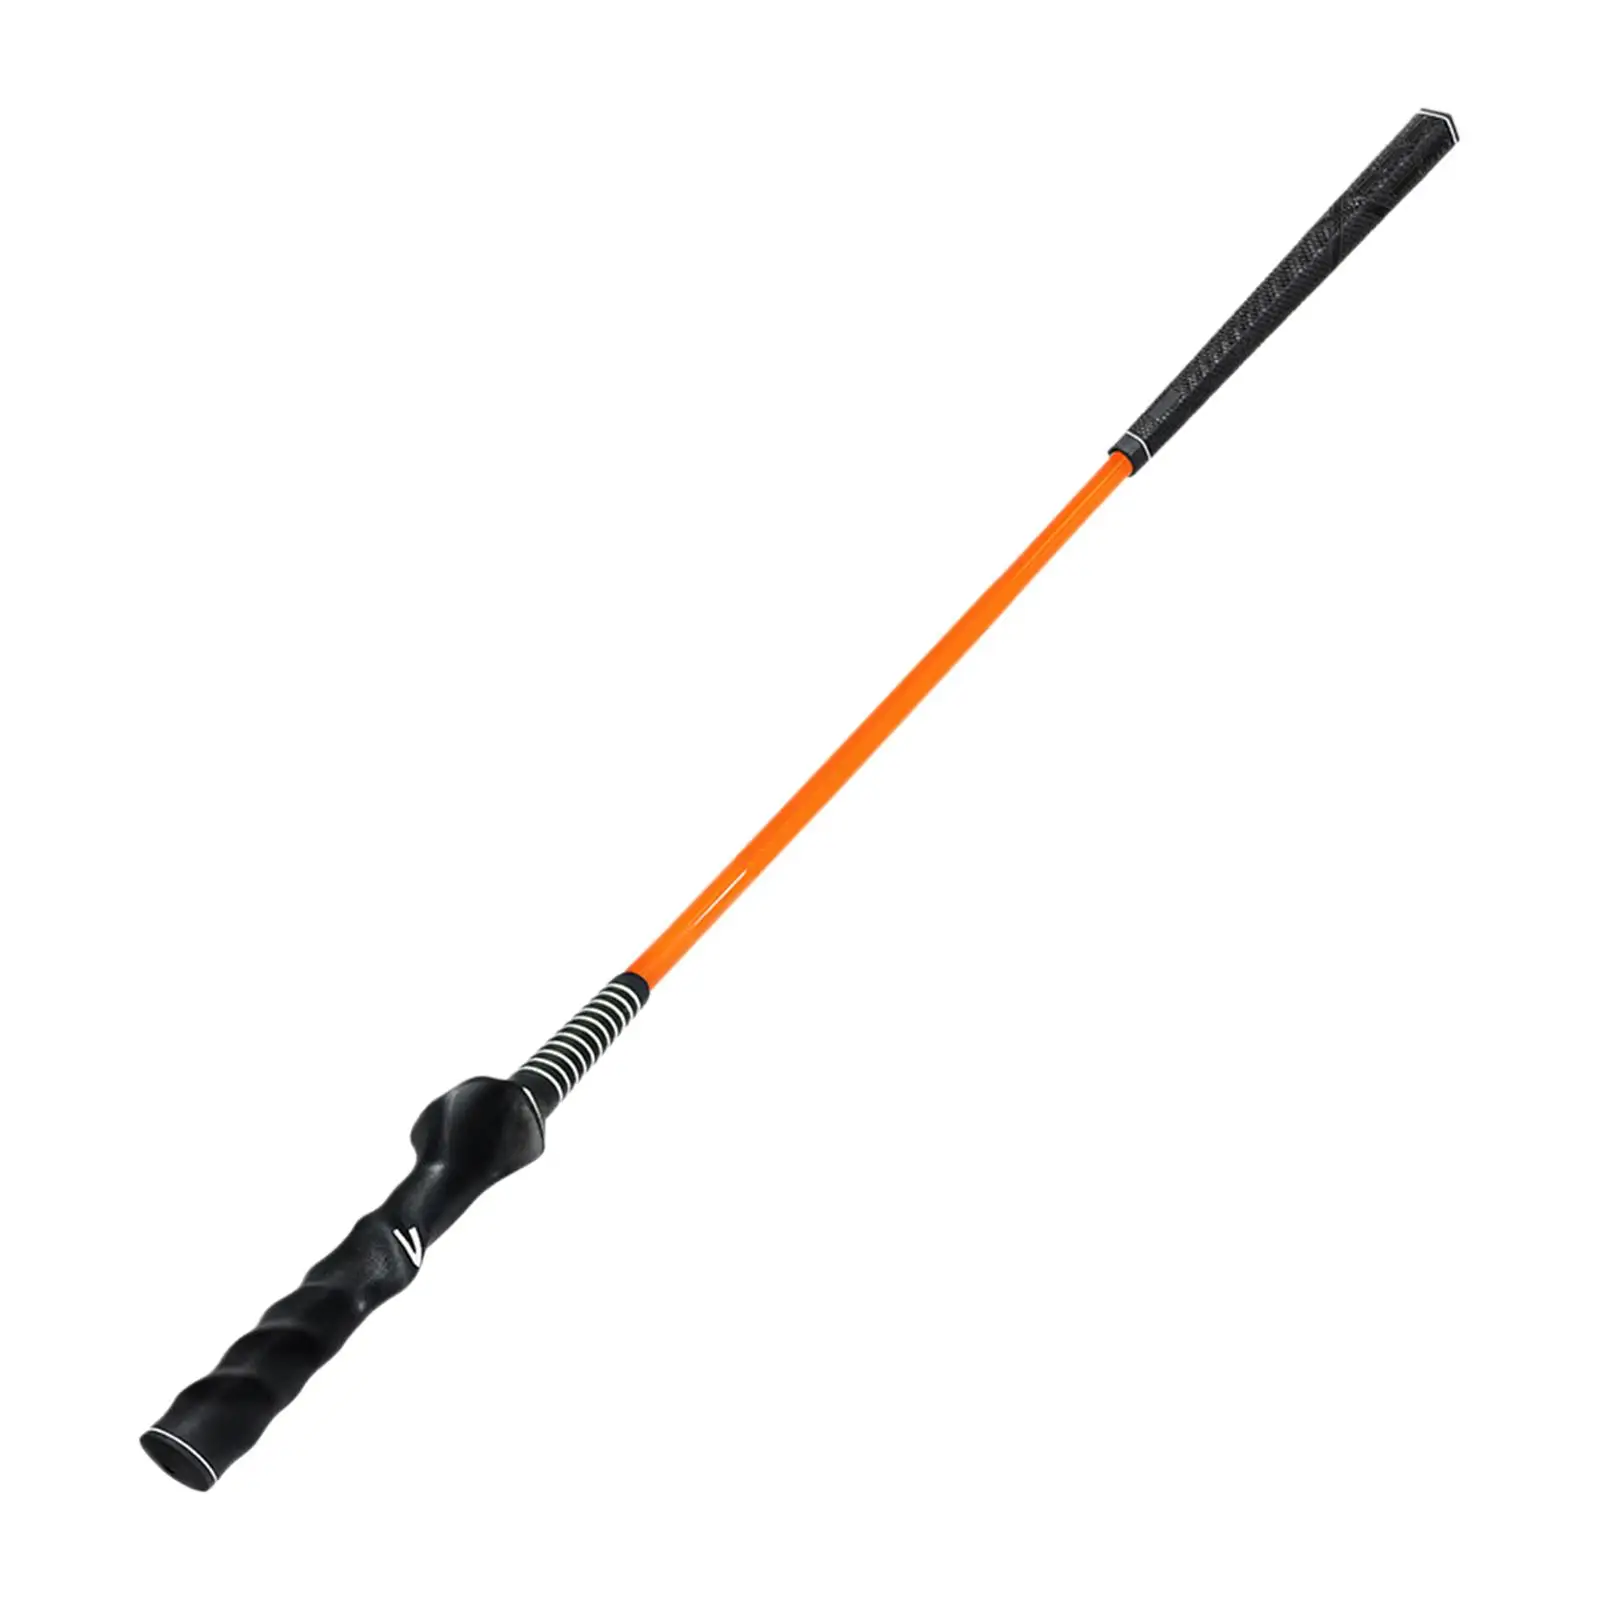 Golf Swing Trainer for Beginners Comfortable Grip Lightweight Golf Practice Swing Rod for Position Correction Strength Balance